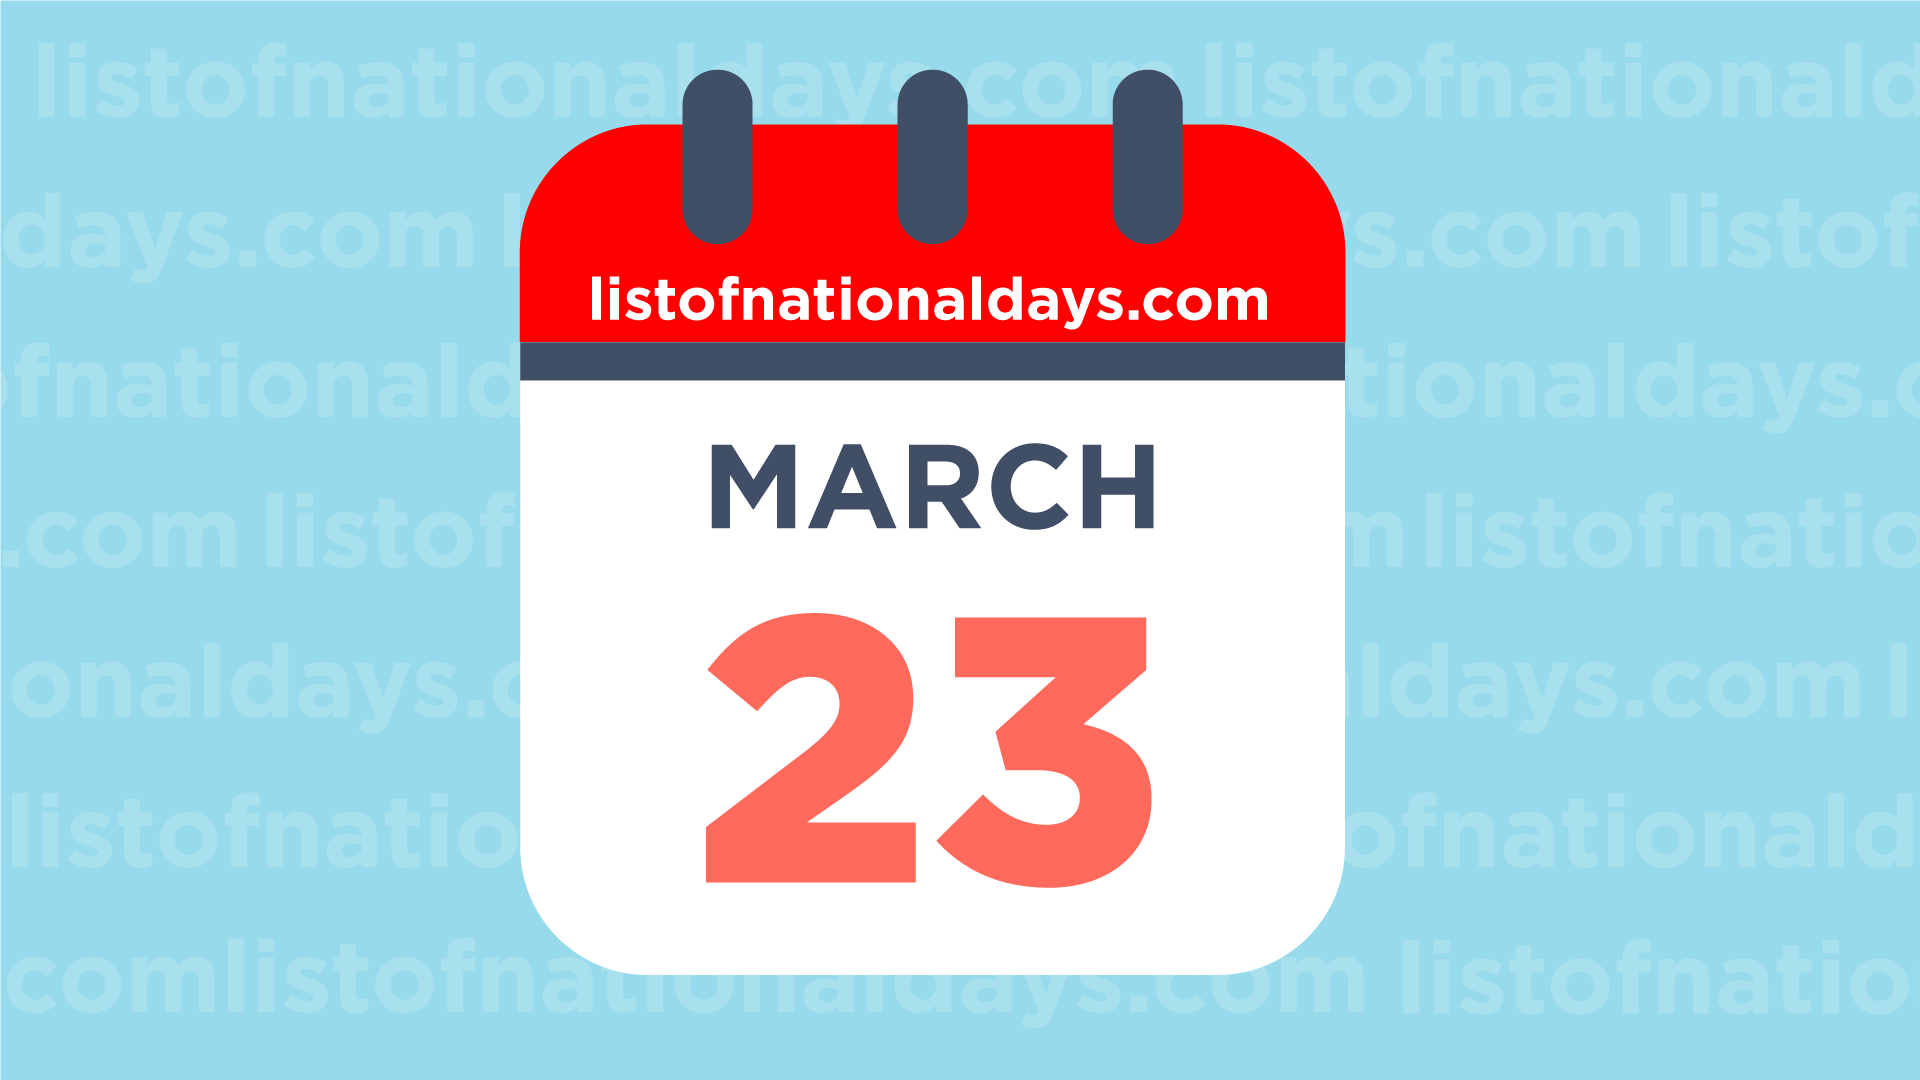 MARCH 23RD National Holidays, Observances & Famous Birthdays